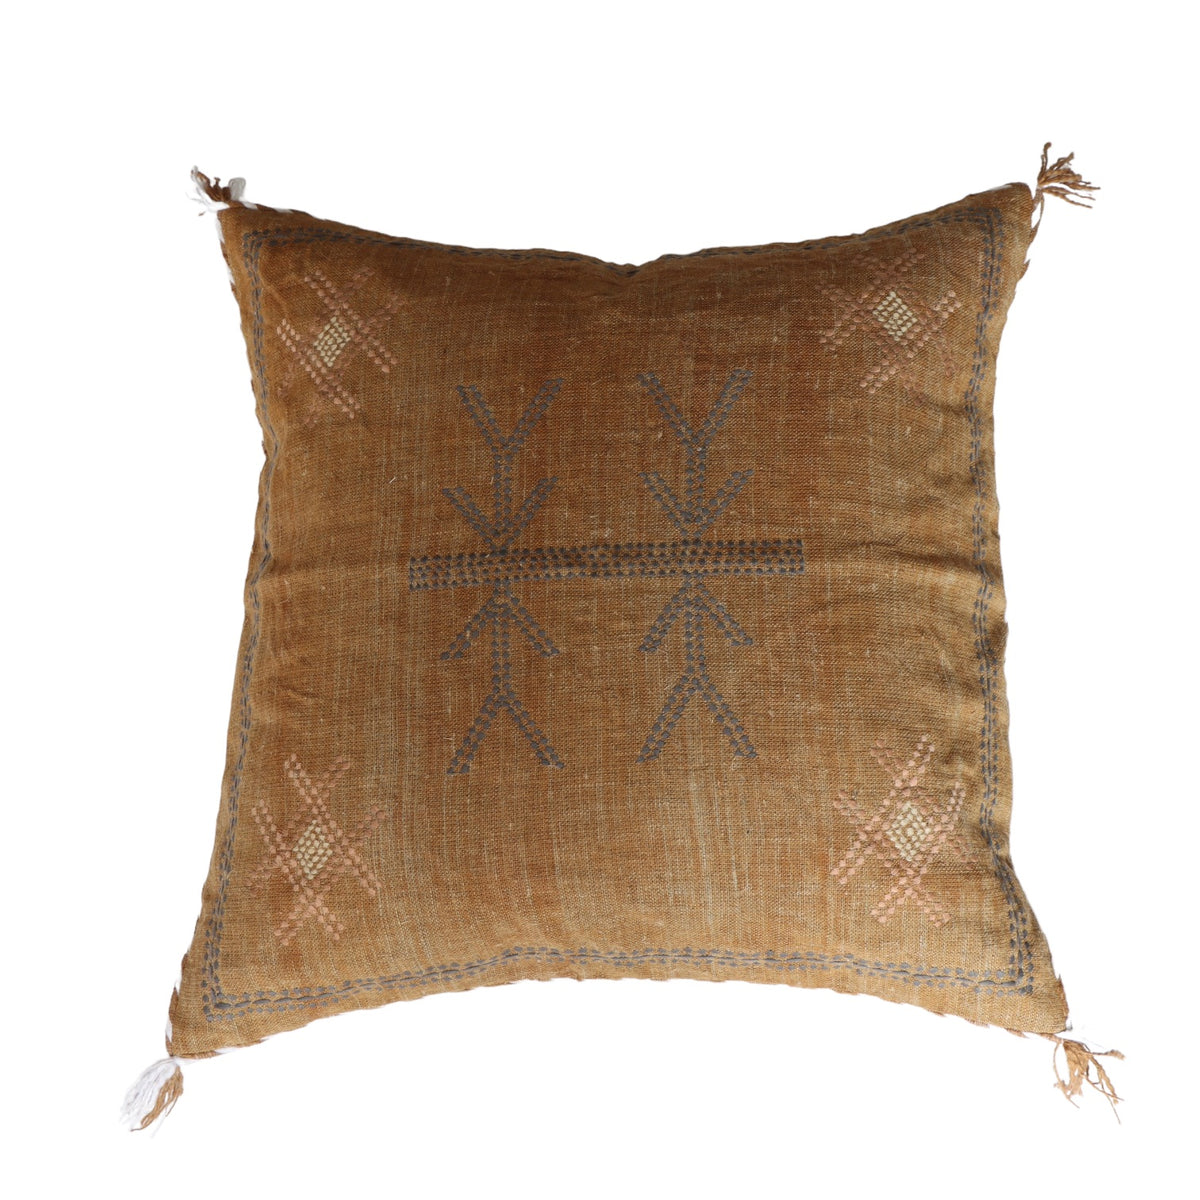 Milly Mustard Linen Pillow Cover - 20 Inch - Holistic Habitat 